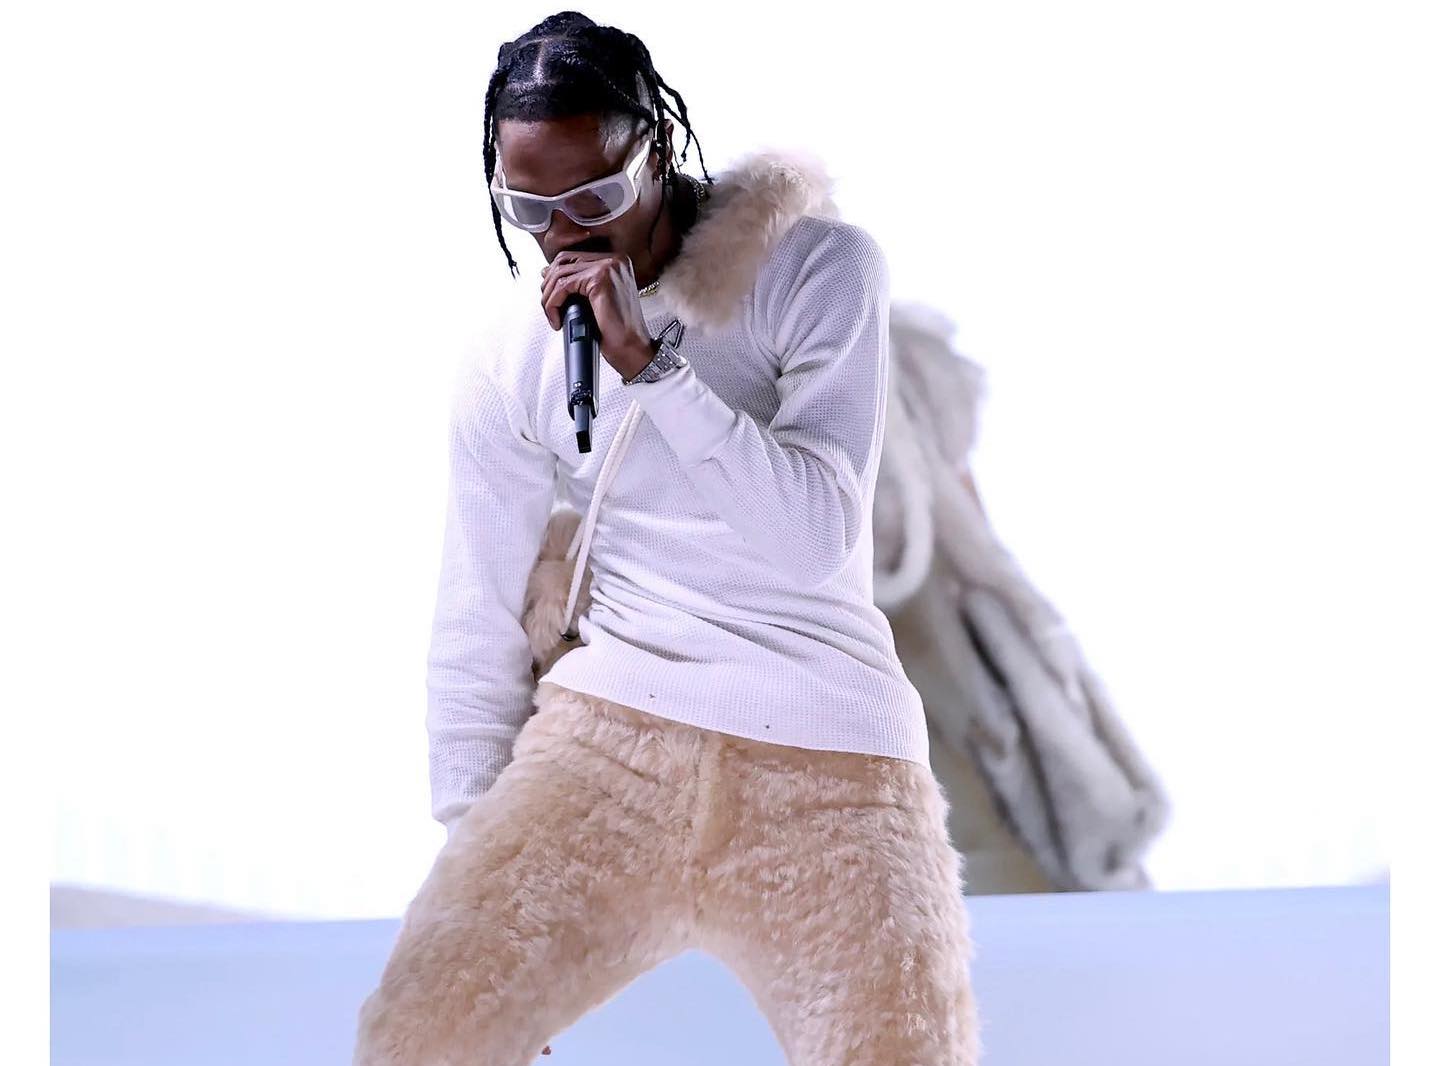 SPOTTED: Travis Scott Performs @ BBMAs in Givenchy & ERL